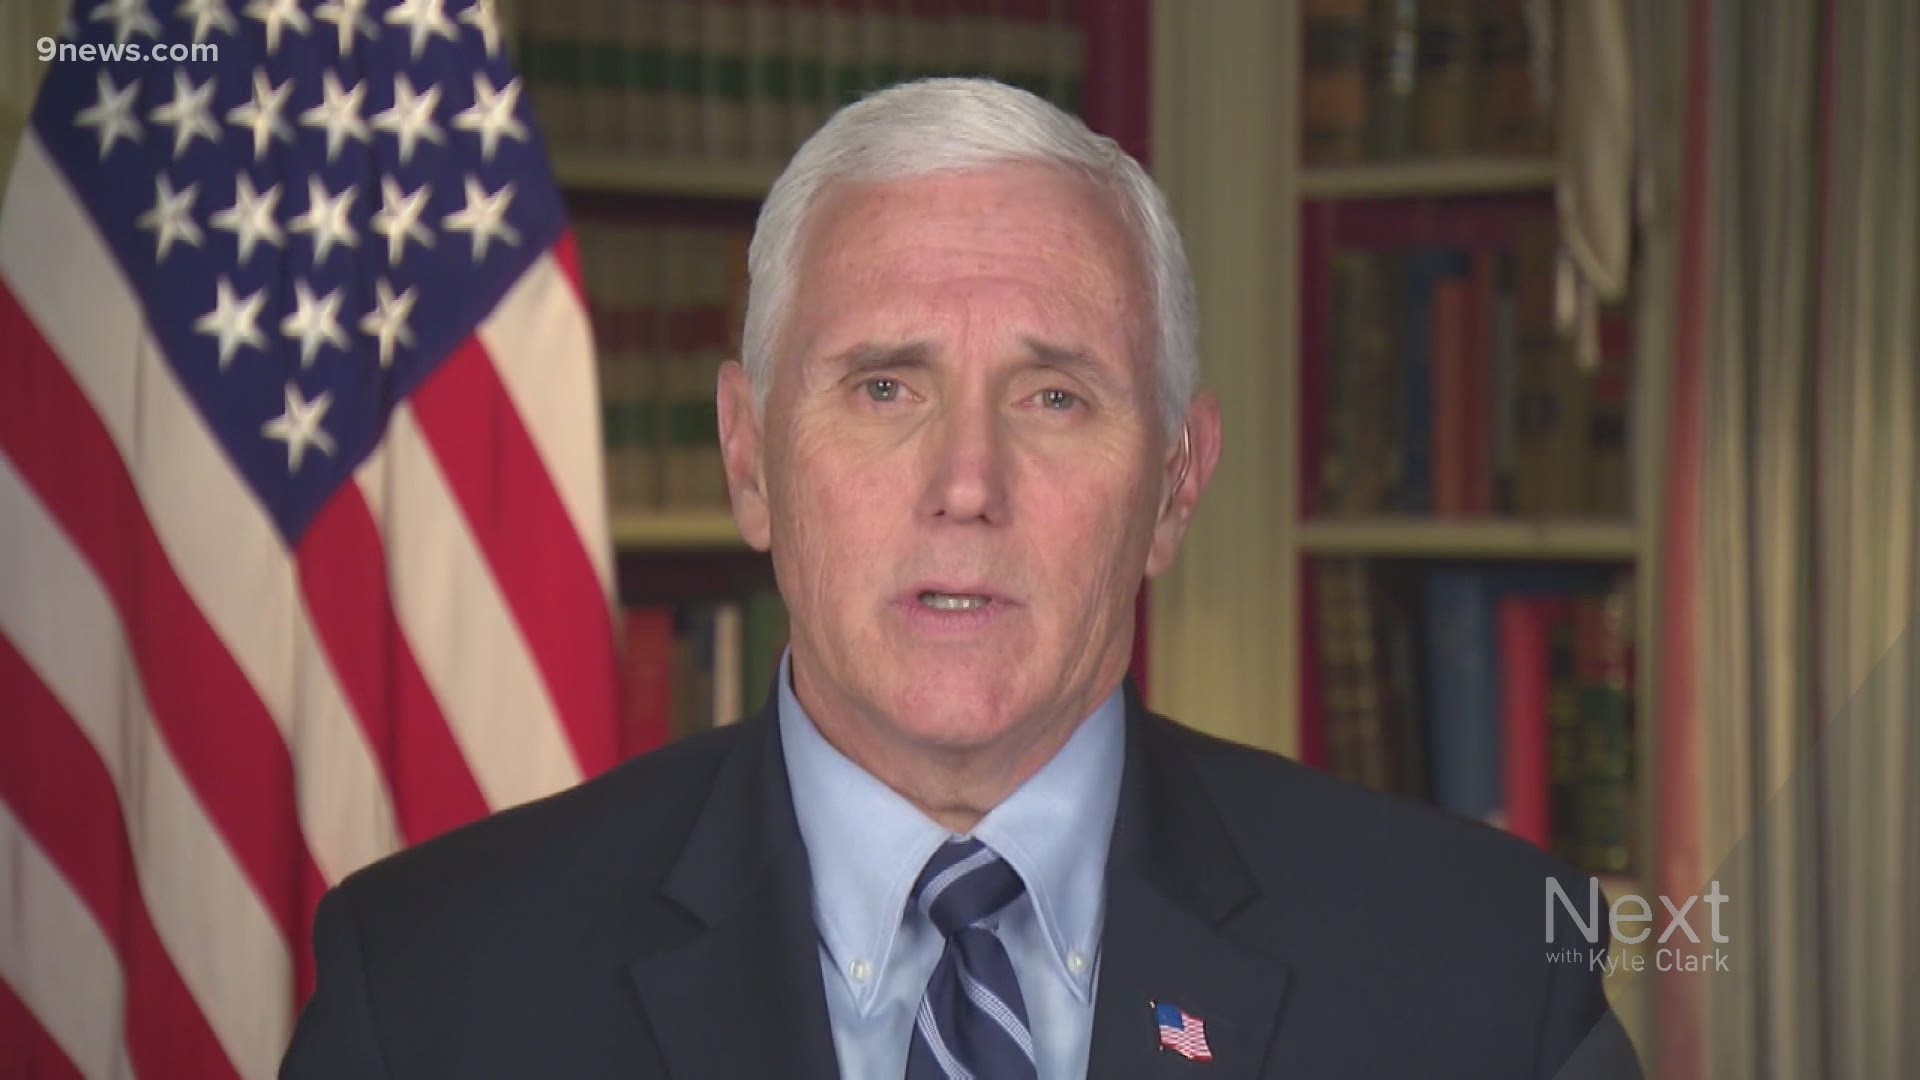 America's COVID-19 started slow and still lags behind goals. Kyle Clark spoke with Vice President Mike Pence and asked if the early promises were misleading.